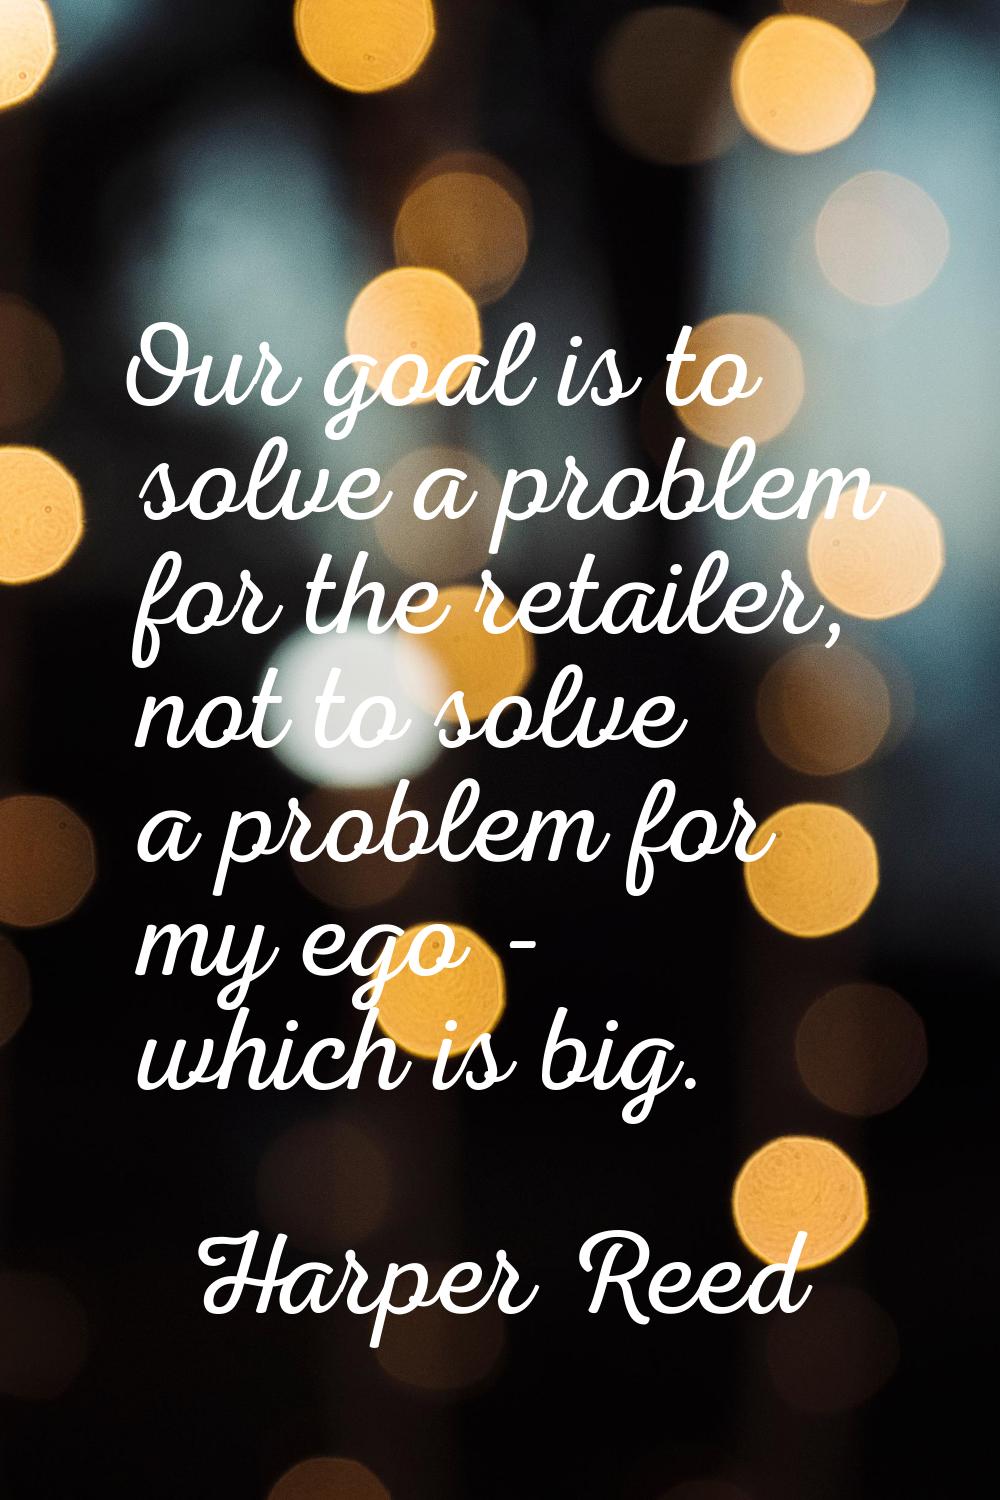 Our goal is to solve a problem for the retailer, not to solve a problem for my ego - which is big.